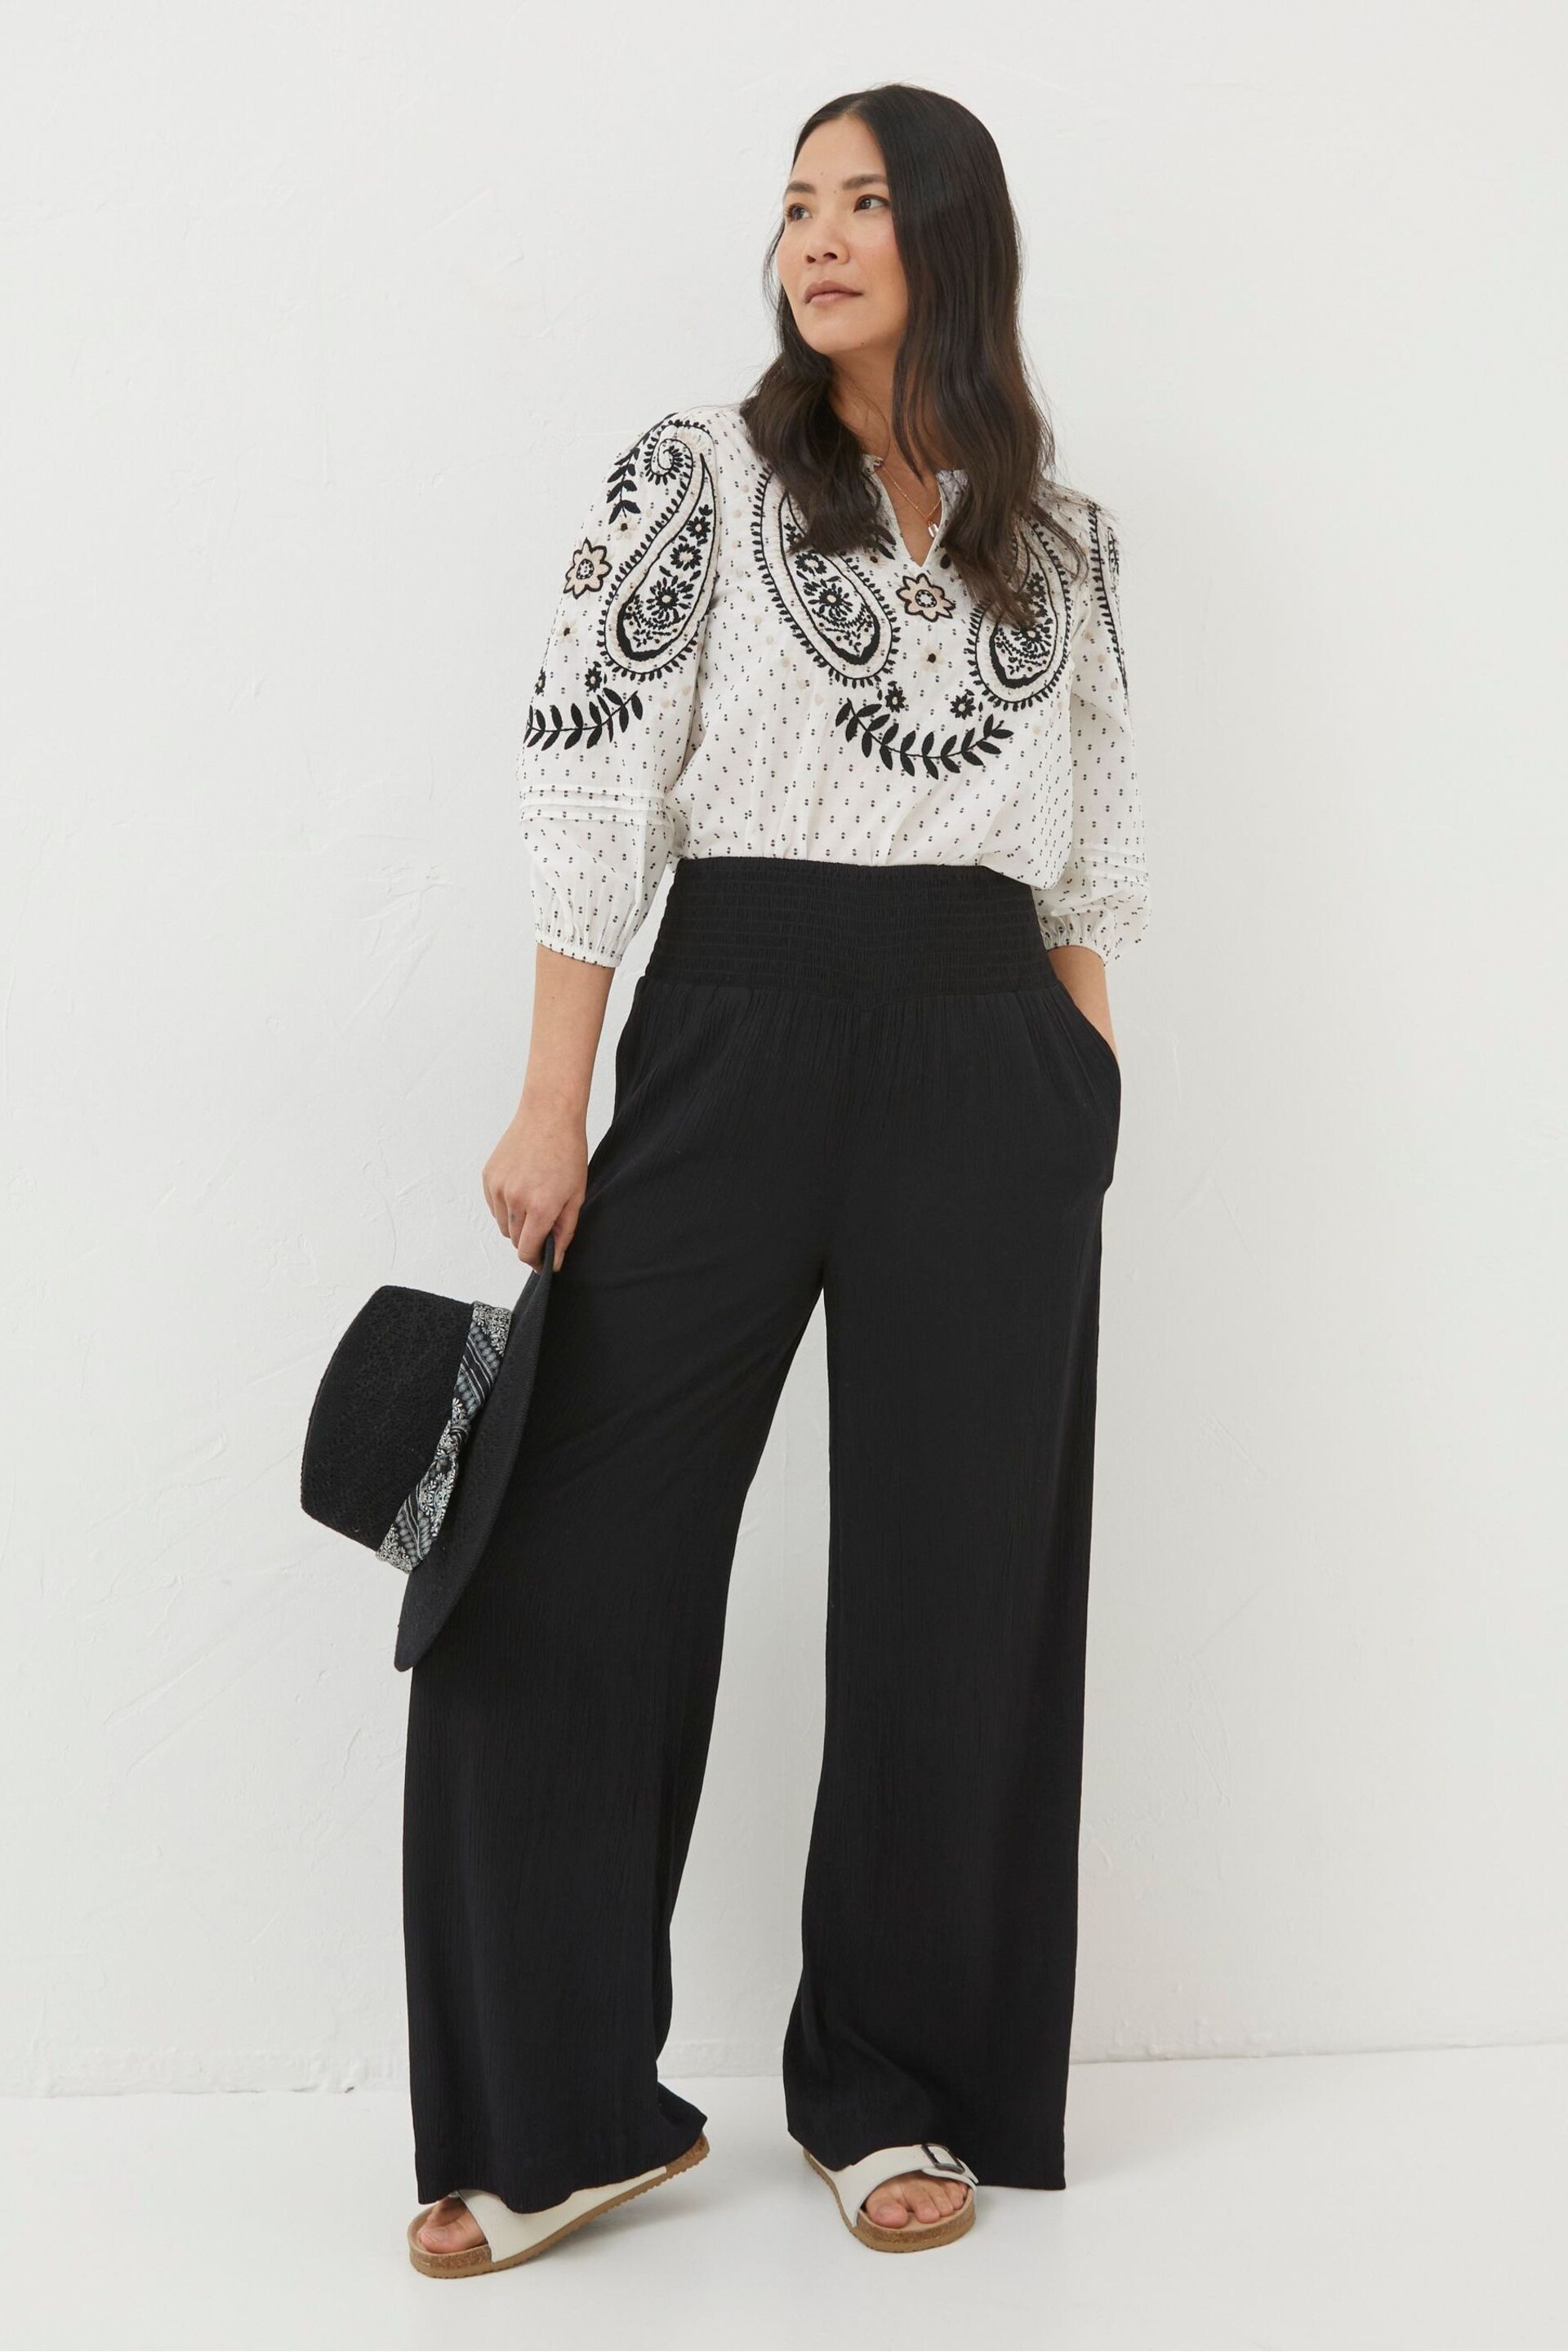 FatFace Black Shirred Wide Leg Palazzo Trousers - Image 4 of 6